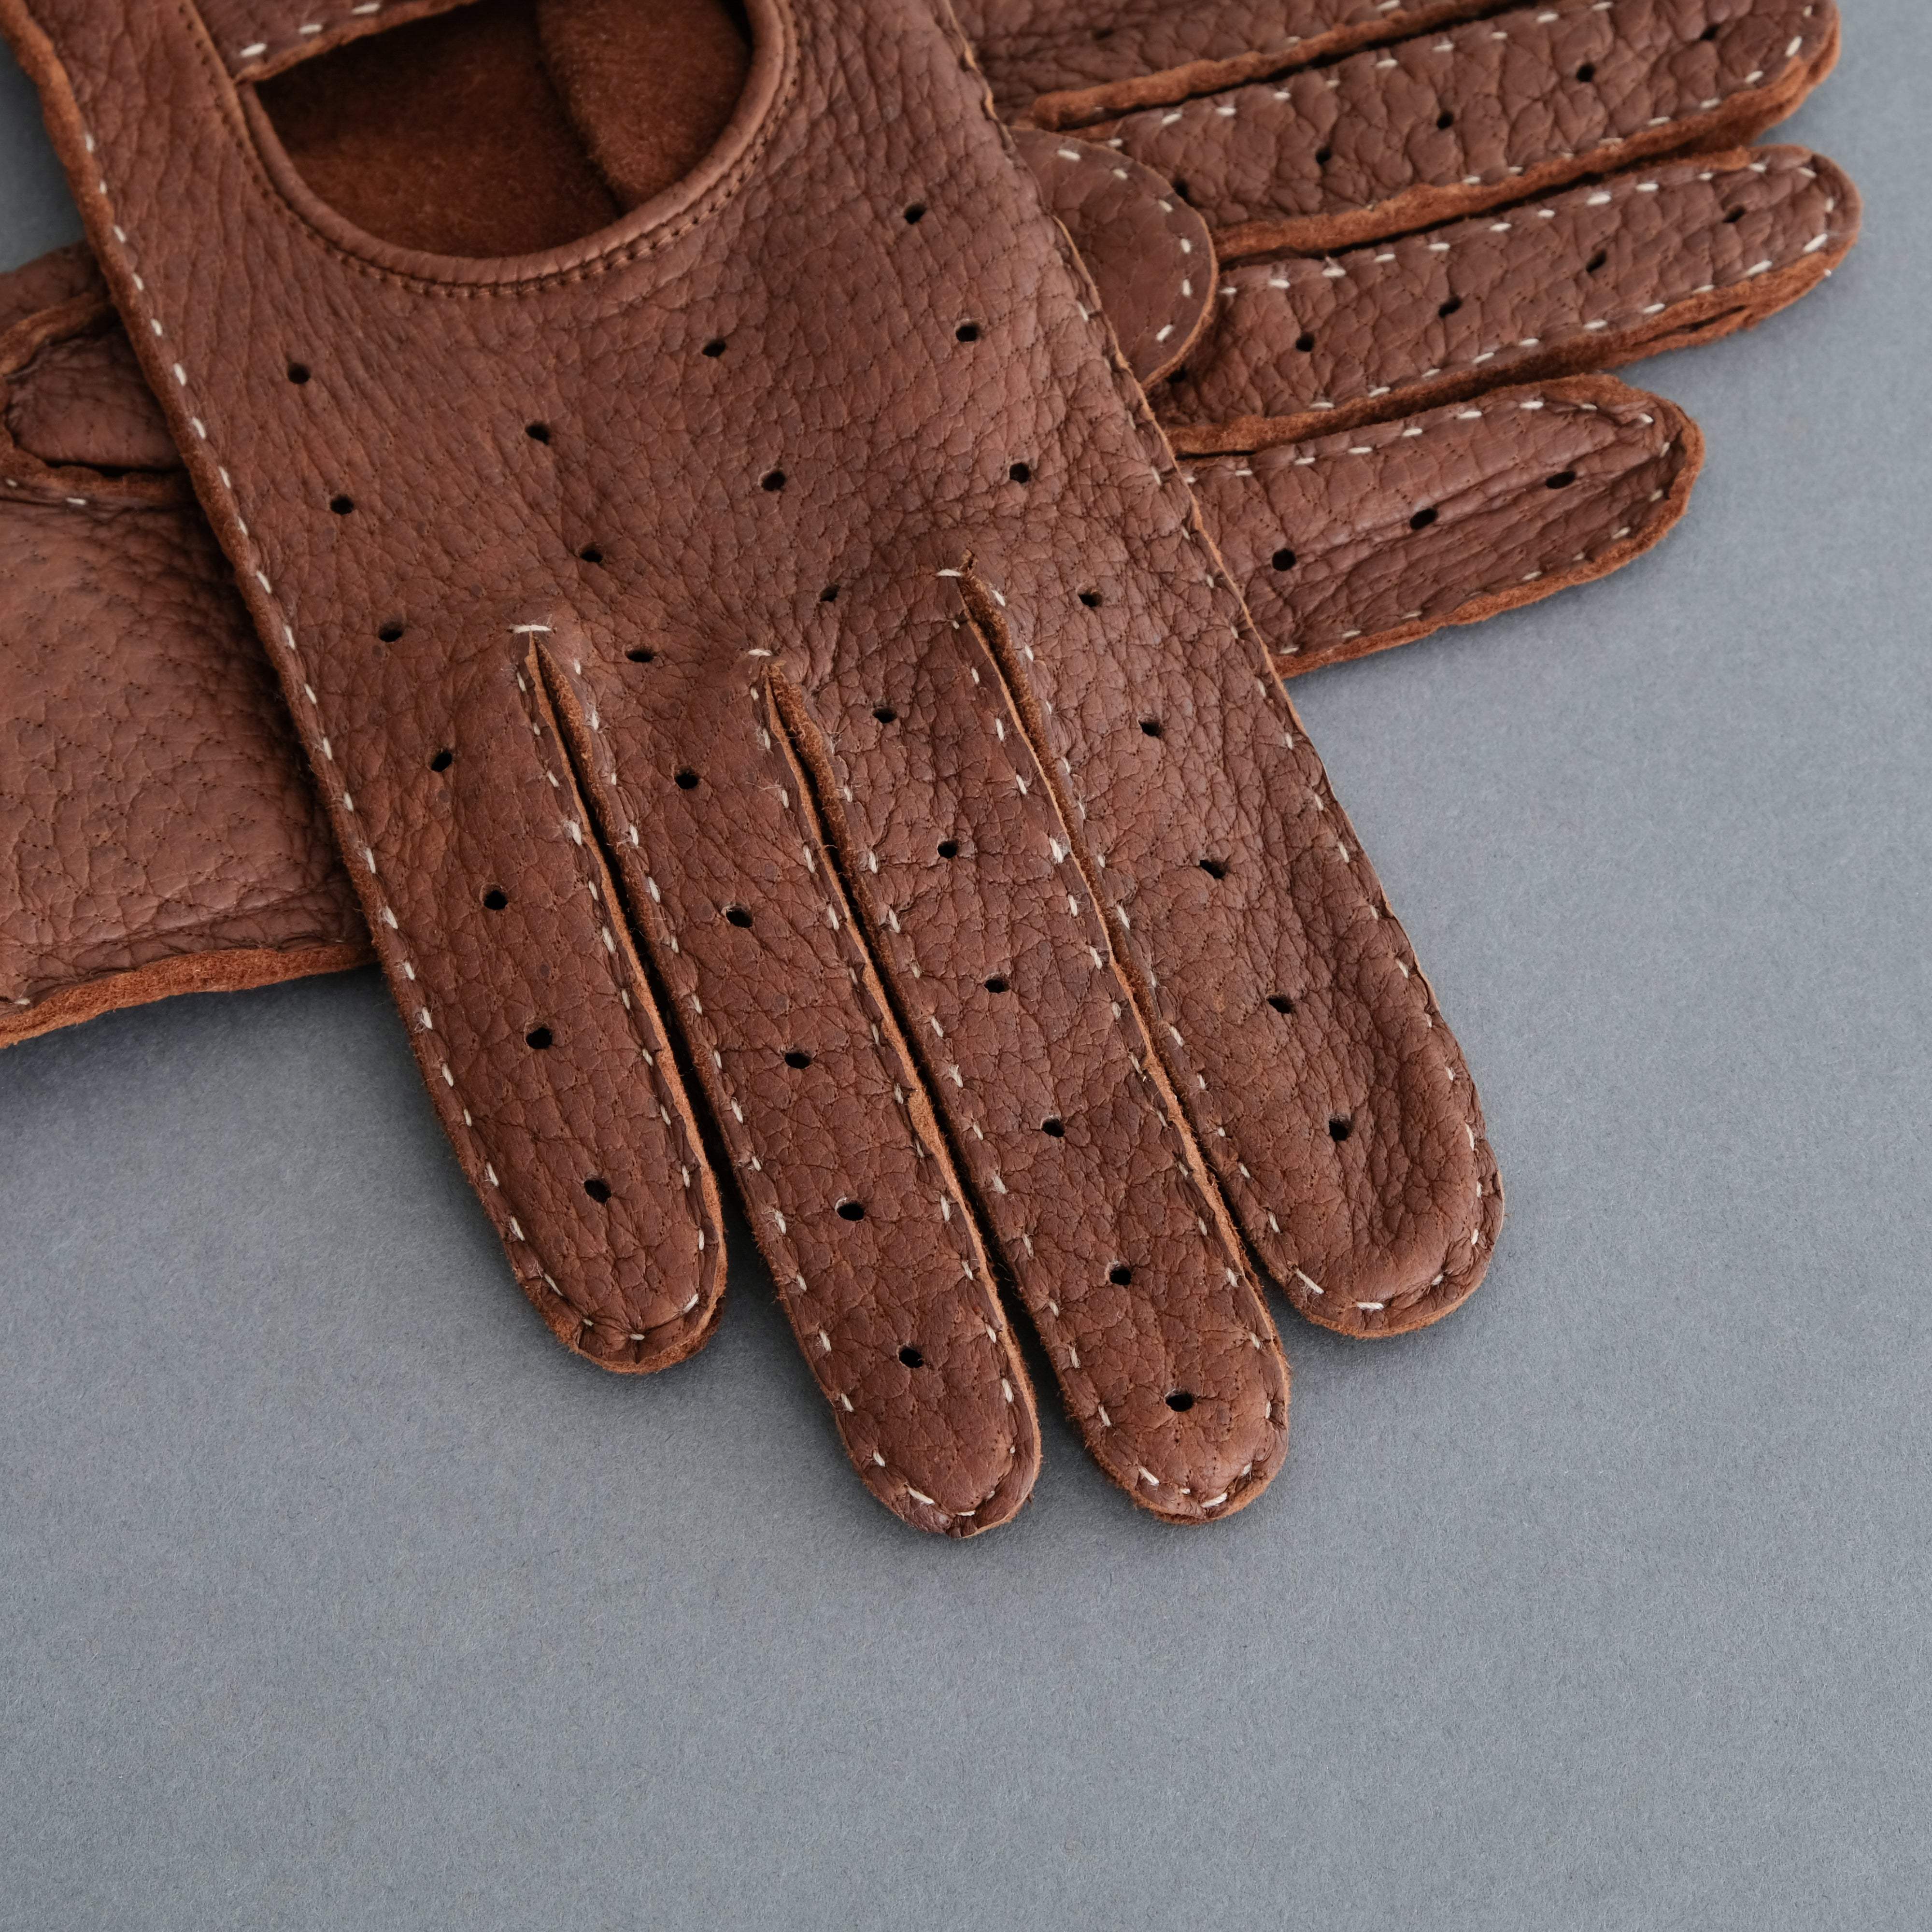 Ladies Driving Gloves From Mid-Brown Peccary Leather - TR Handschuhe Wien - Thomas Riemer Handmade Gloves